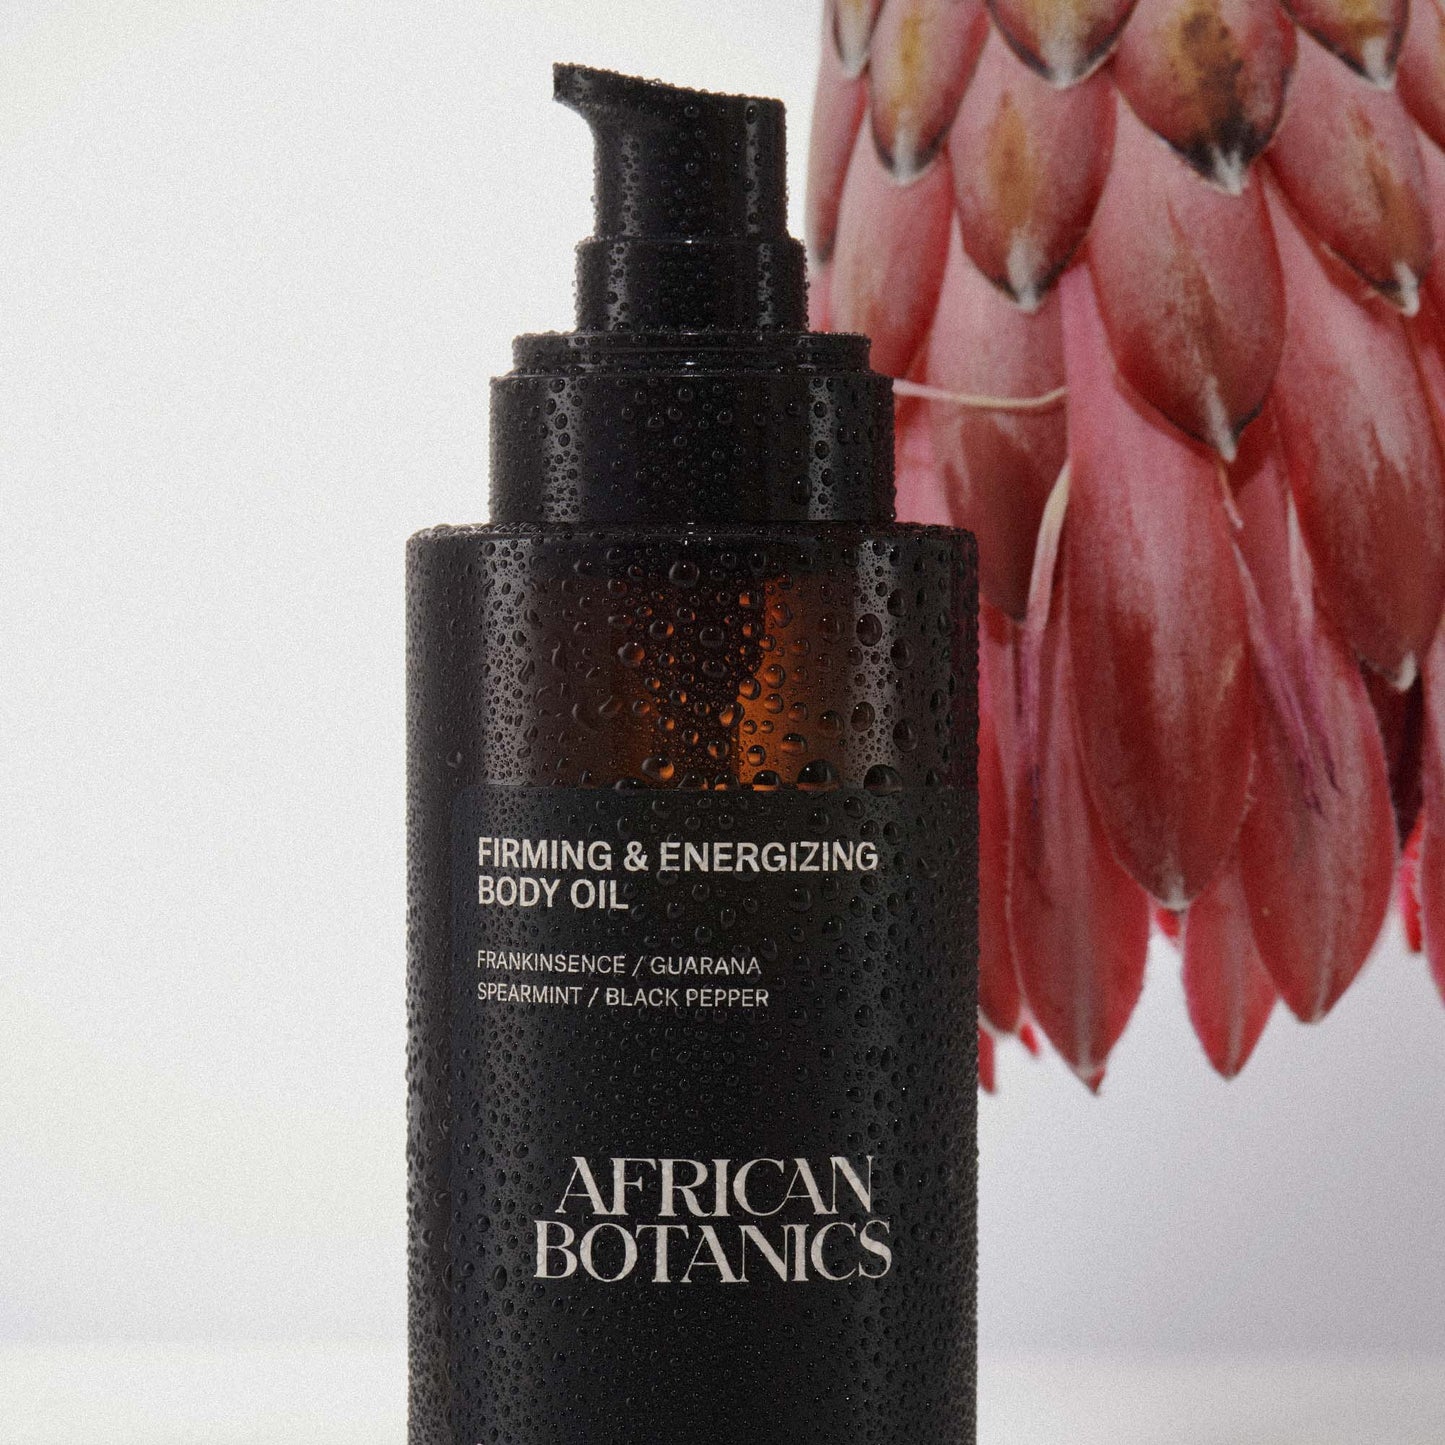 Firming & Energizing Body Oil